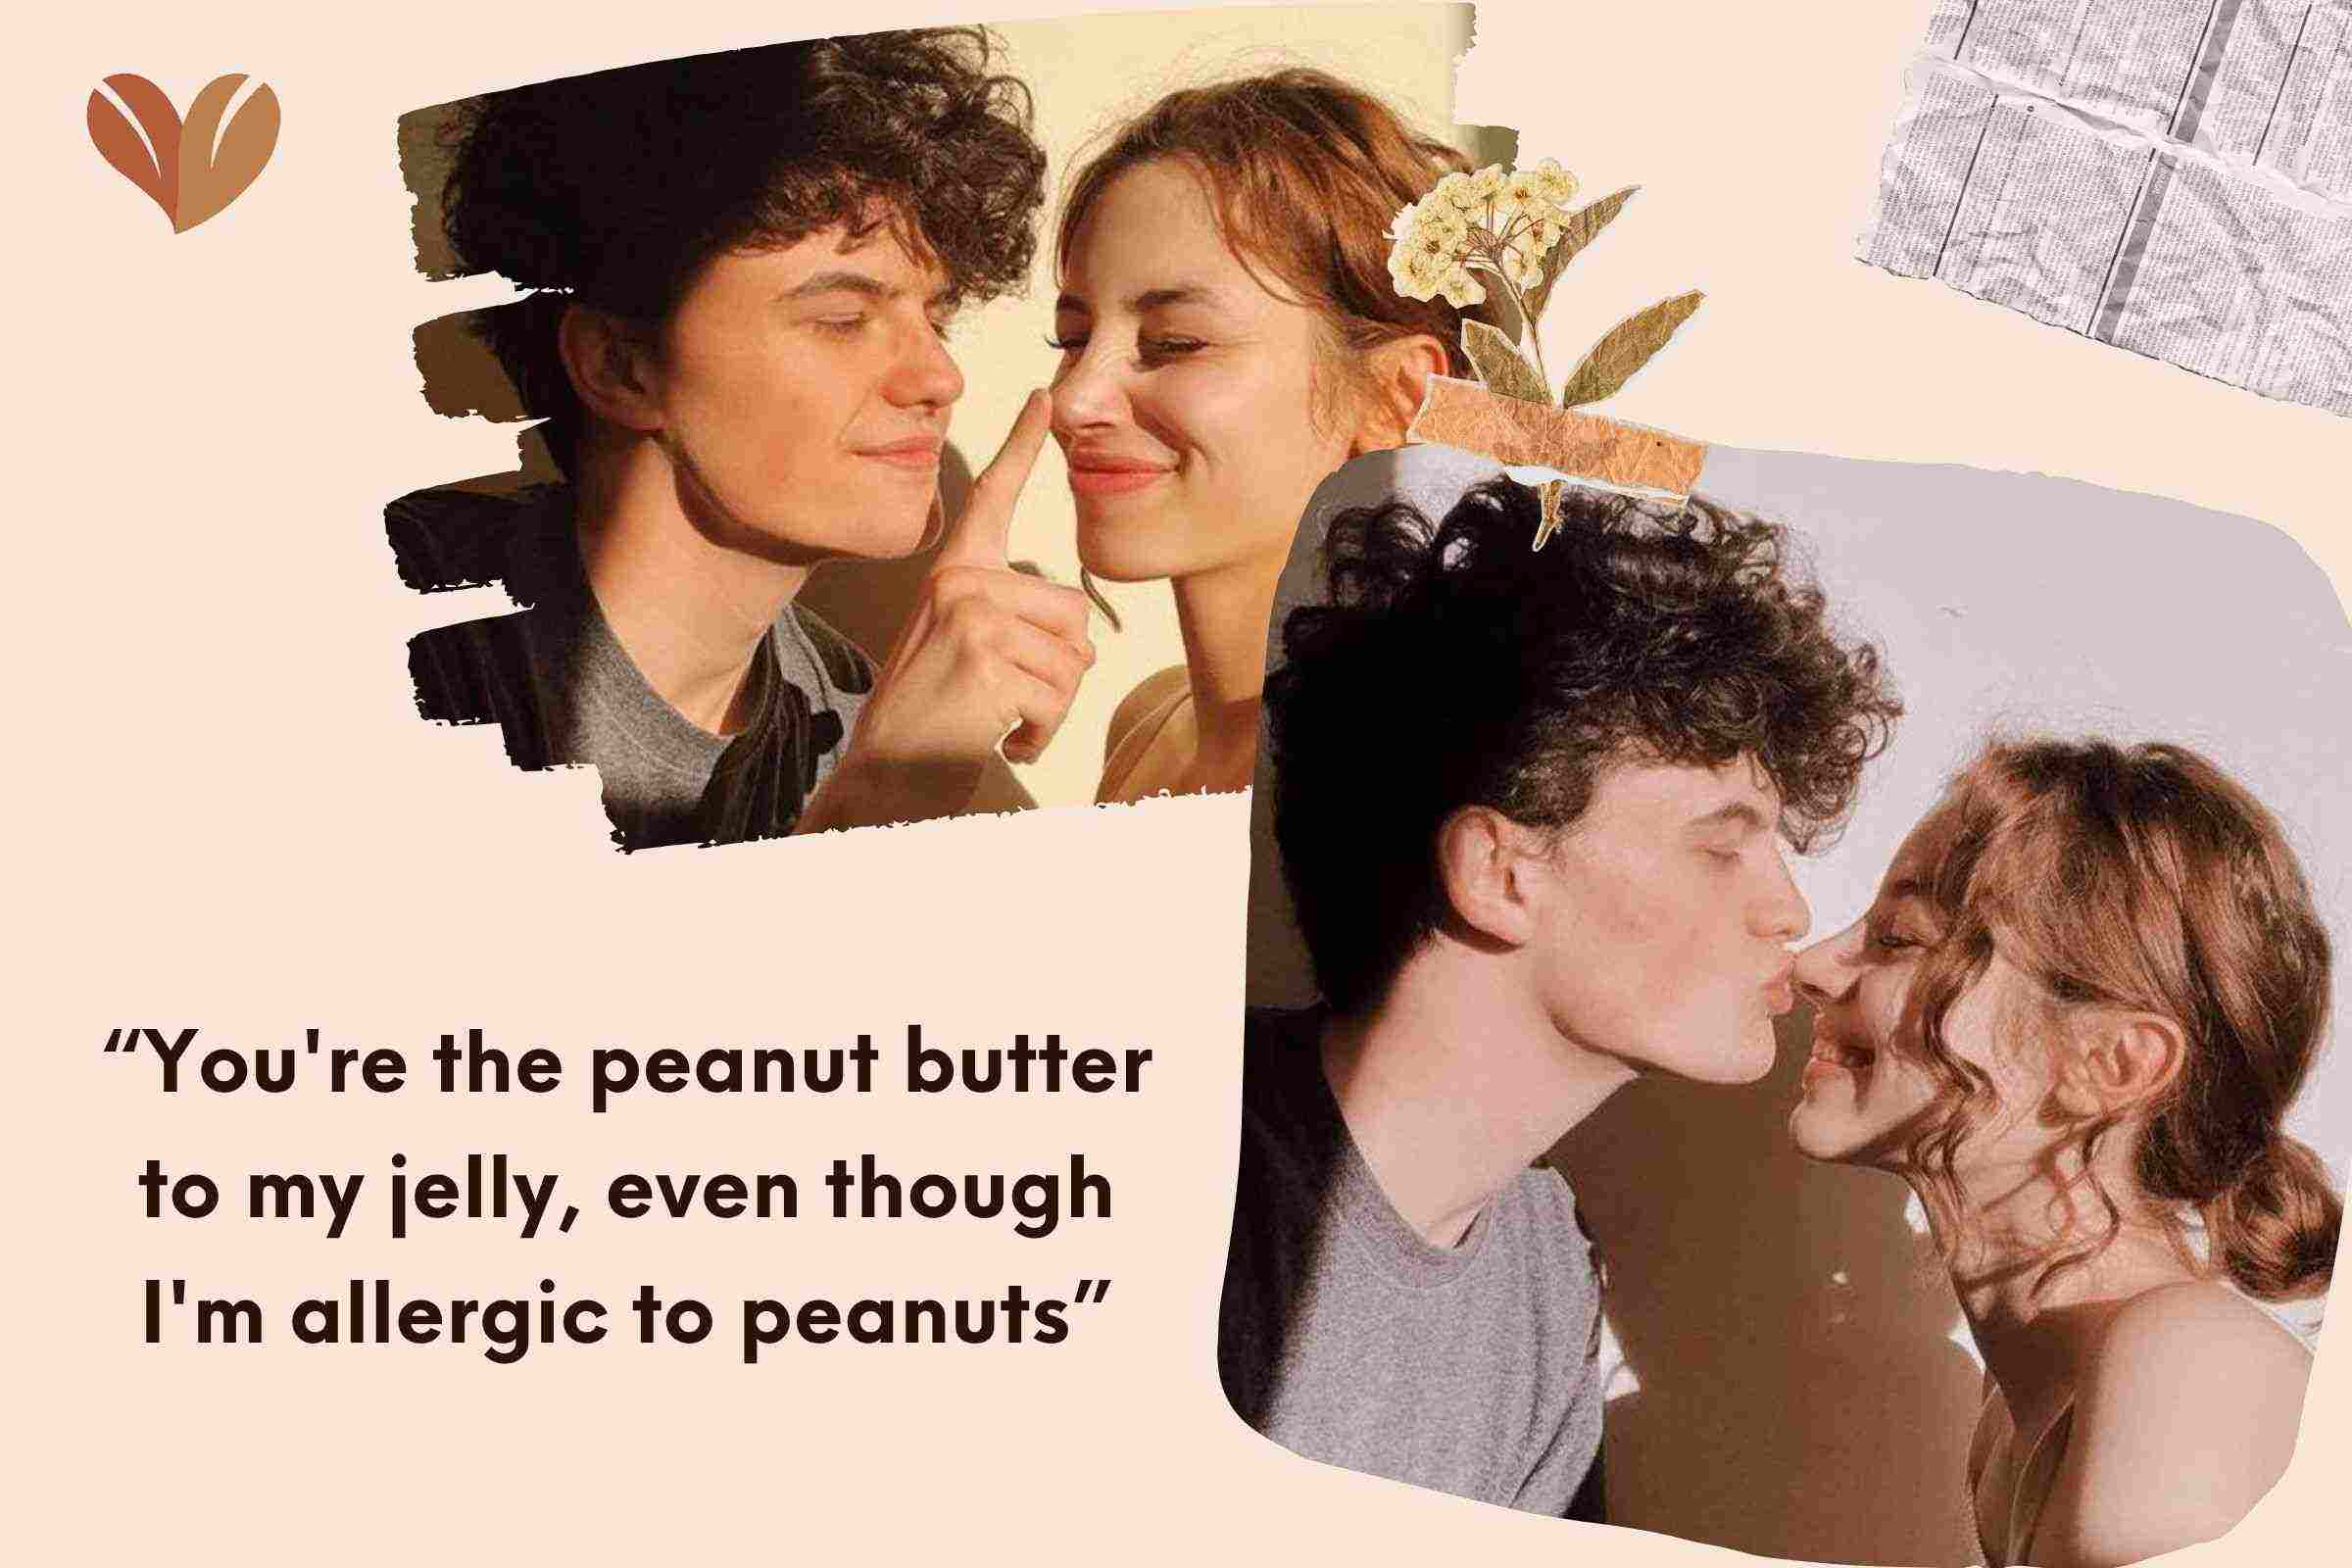 “You're the peanut butter to my jelly, even though I'm allergic to peanuts”